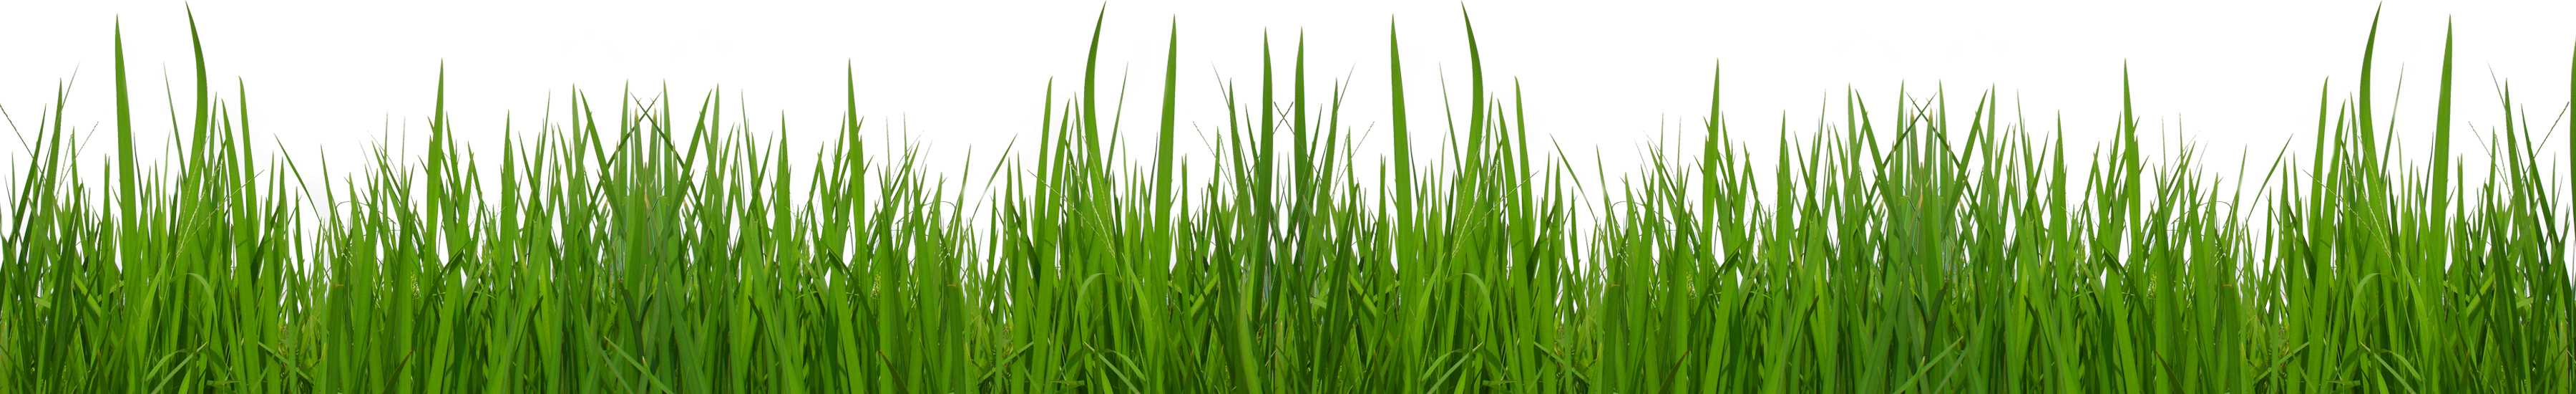 Free grass clip art pictures 